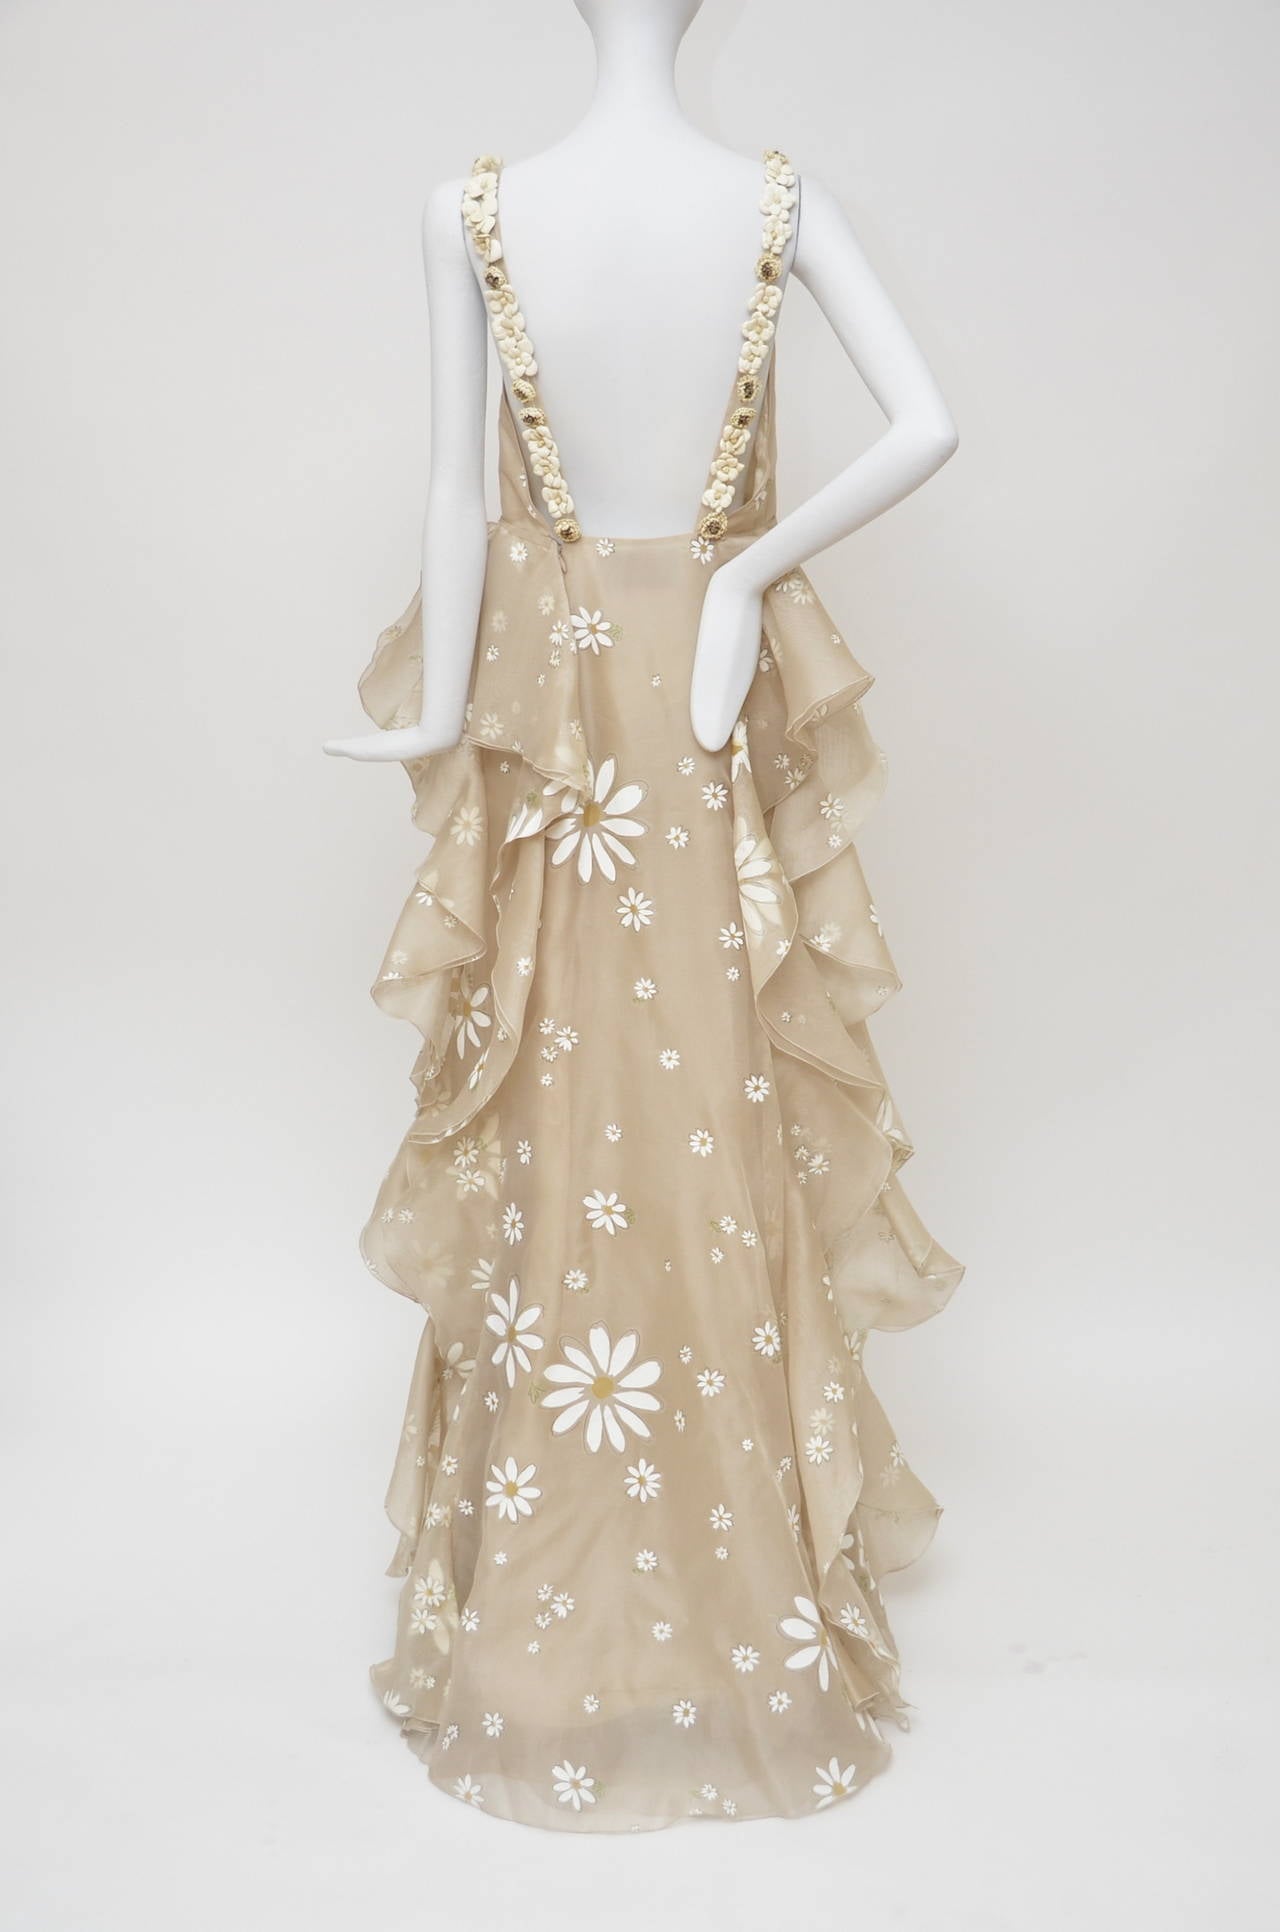 Valentino silk long dress with daisy flower print.
Gorgeous  daisy flowers look like they have been hand painted.
Brand new with tags.Sized 8 but this dress have been purchased from Europe and i believe this is uk sizing.Please see the approximate